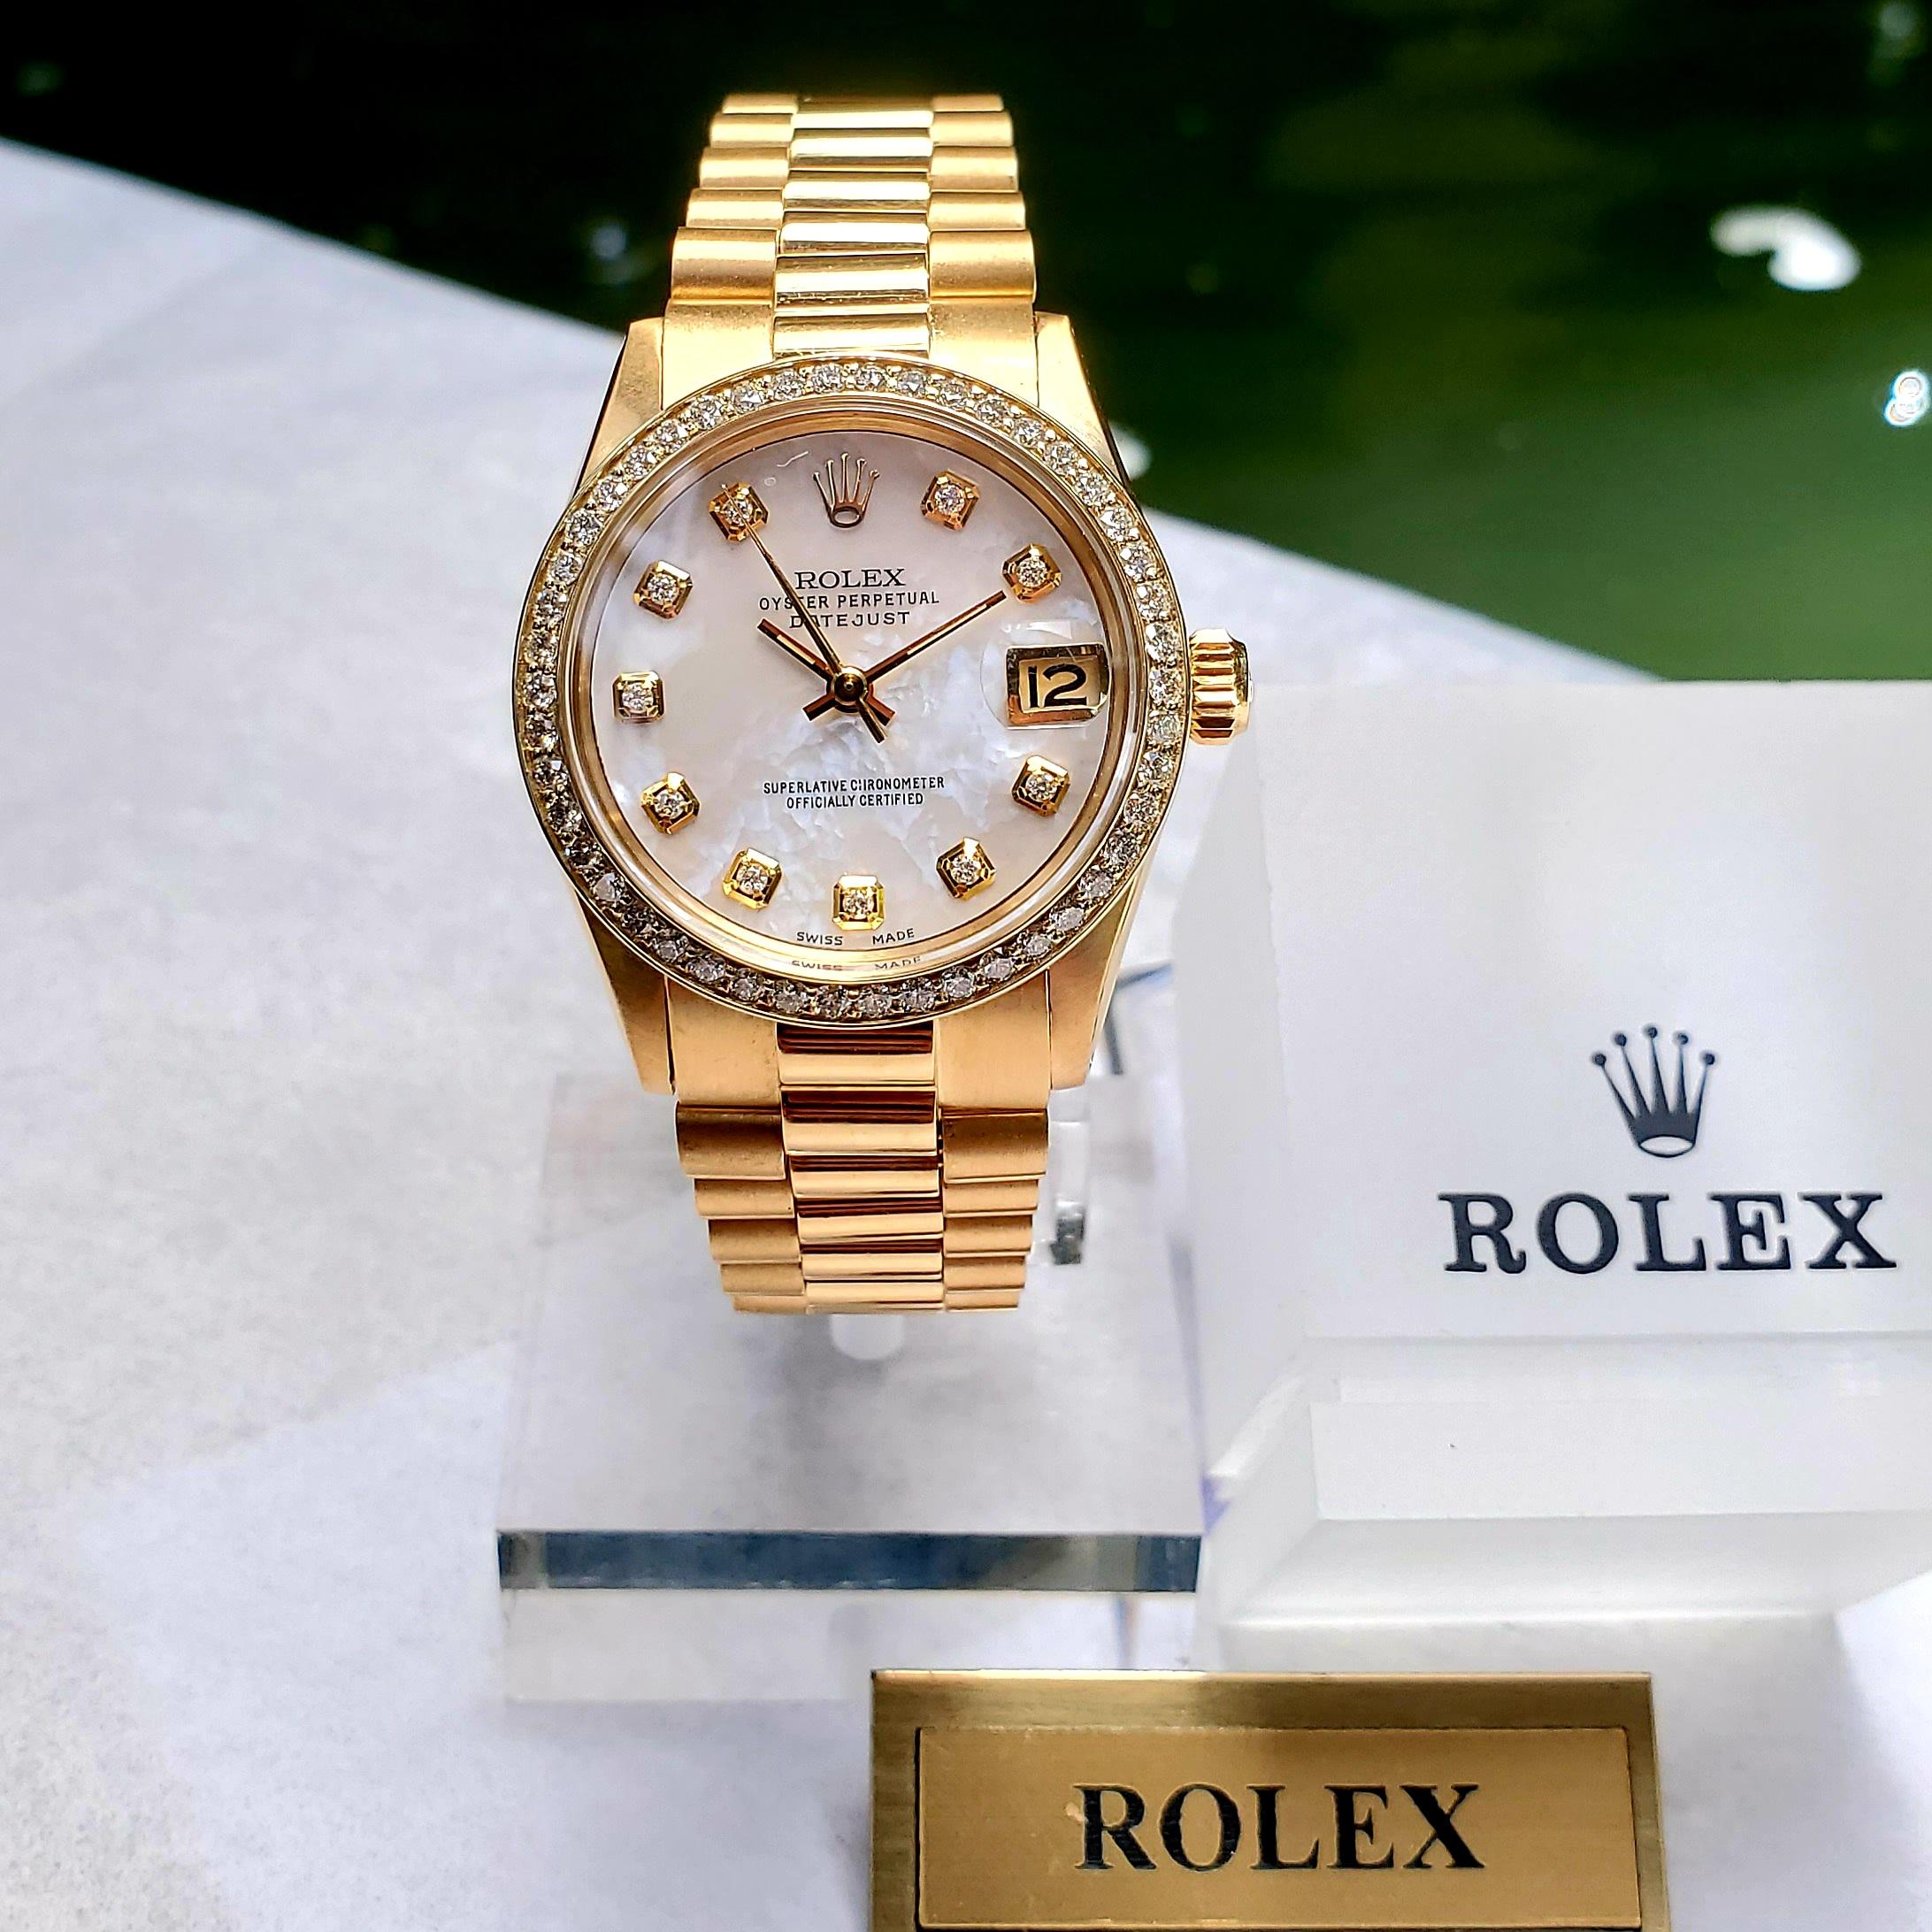 Stunning Rolex 31mm Midsize Datejust with Presidential link bracelet. This timepiece features a mother of pearl diamond dial and diamond bezel. Watch was reviewed and all necessary servicing was completed by a Rolex Authorized watchmaker. There is a